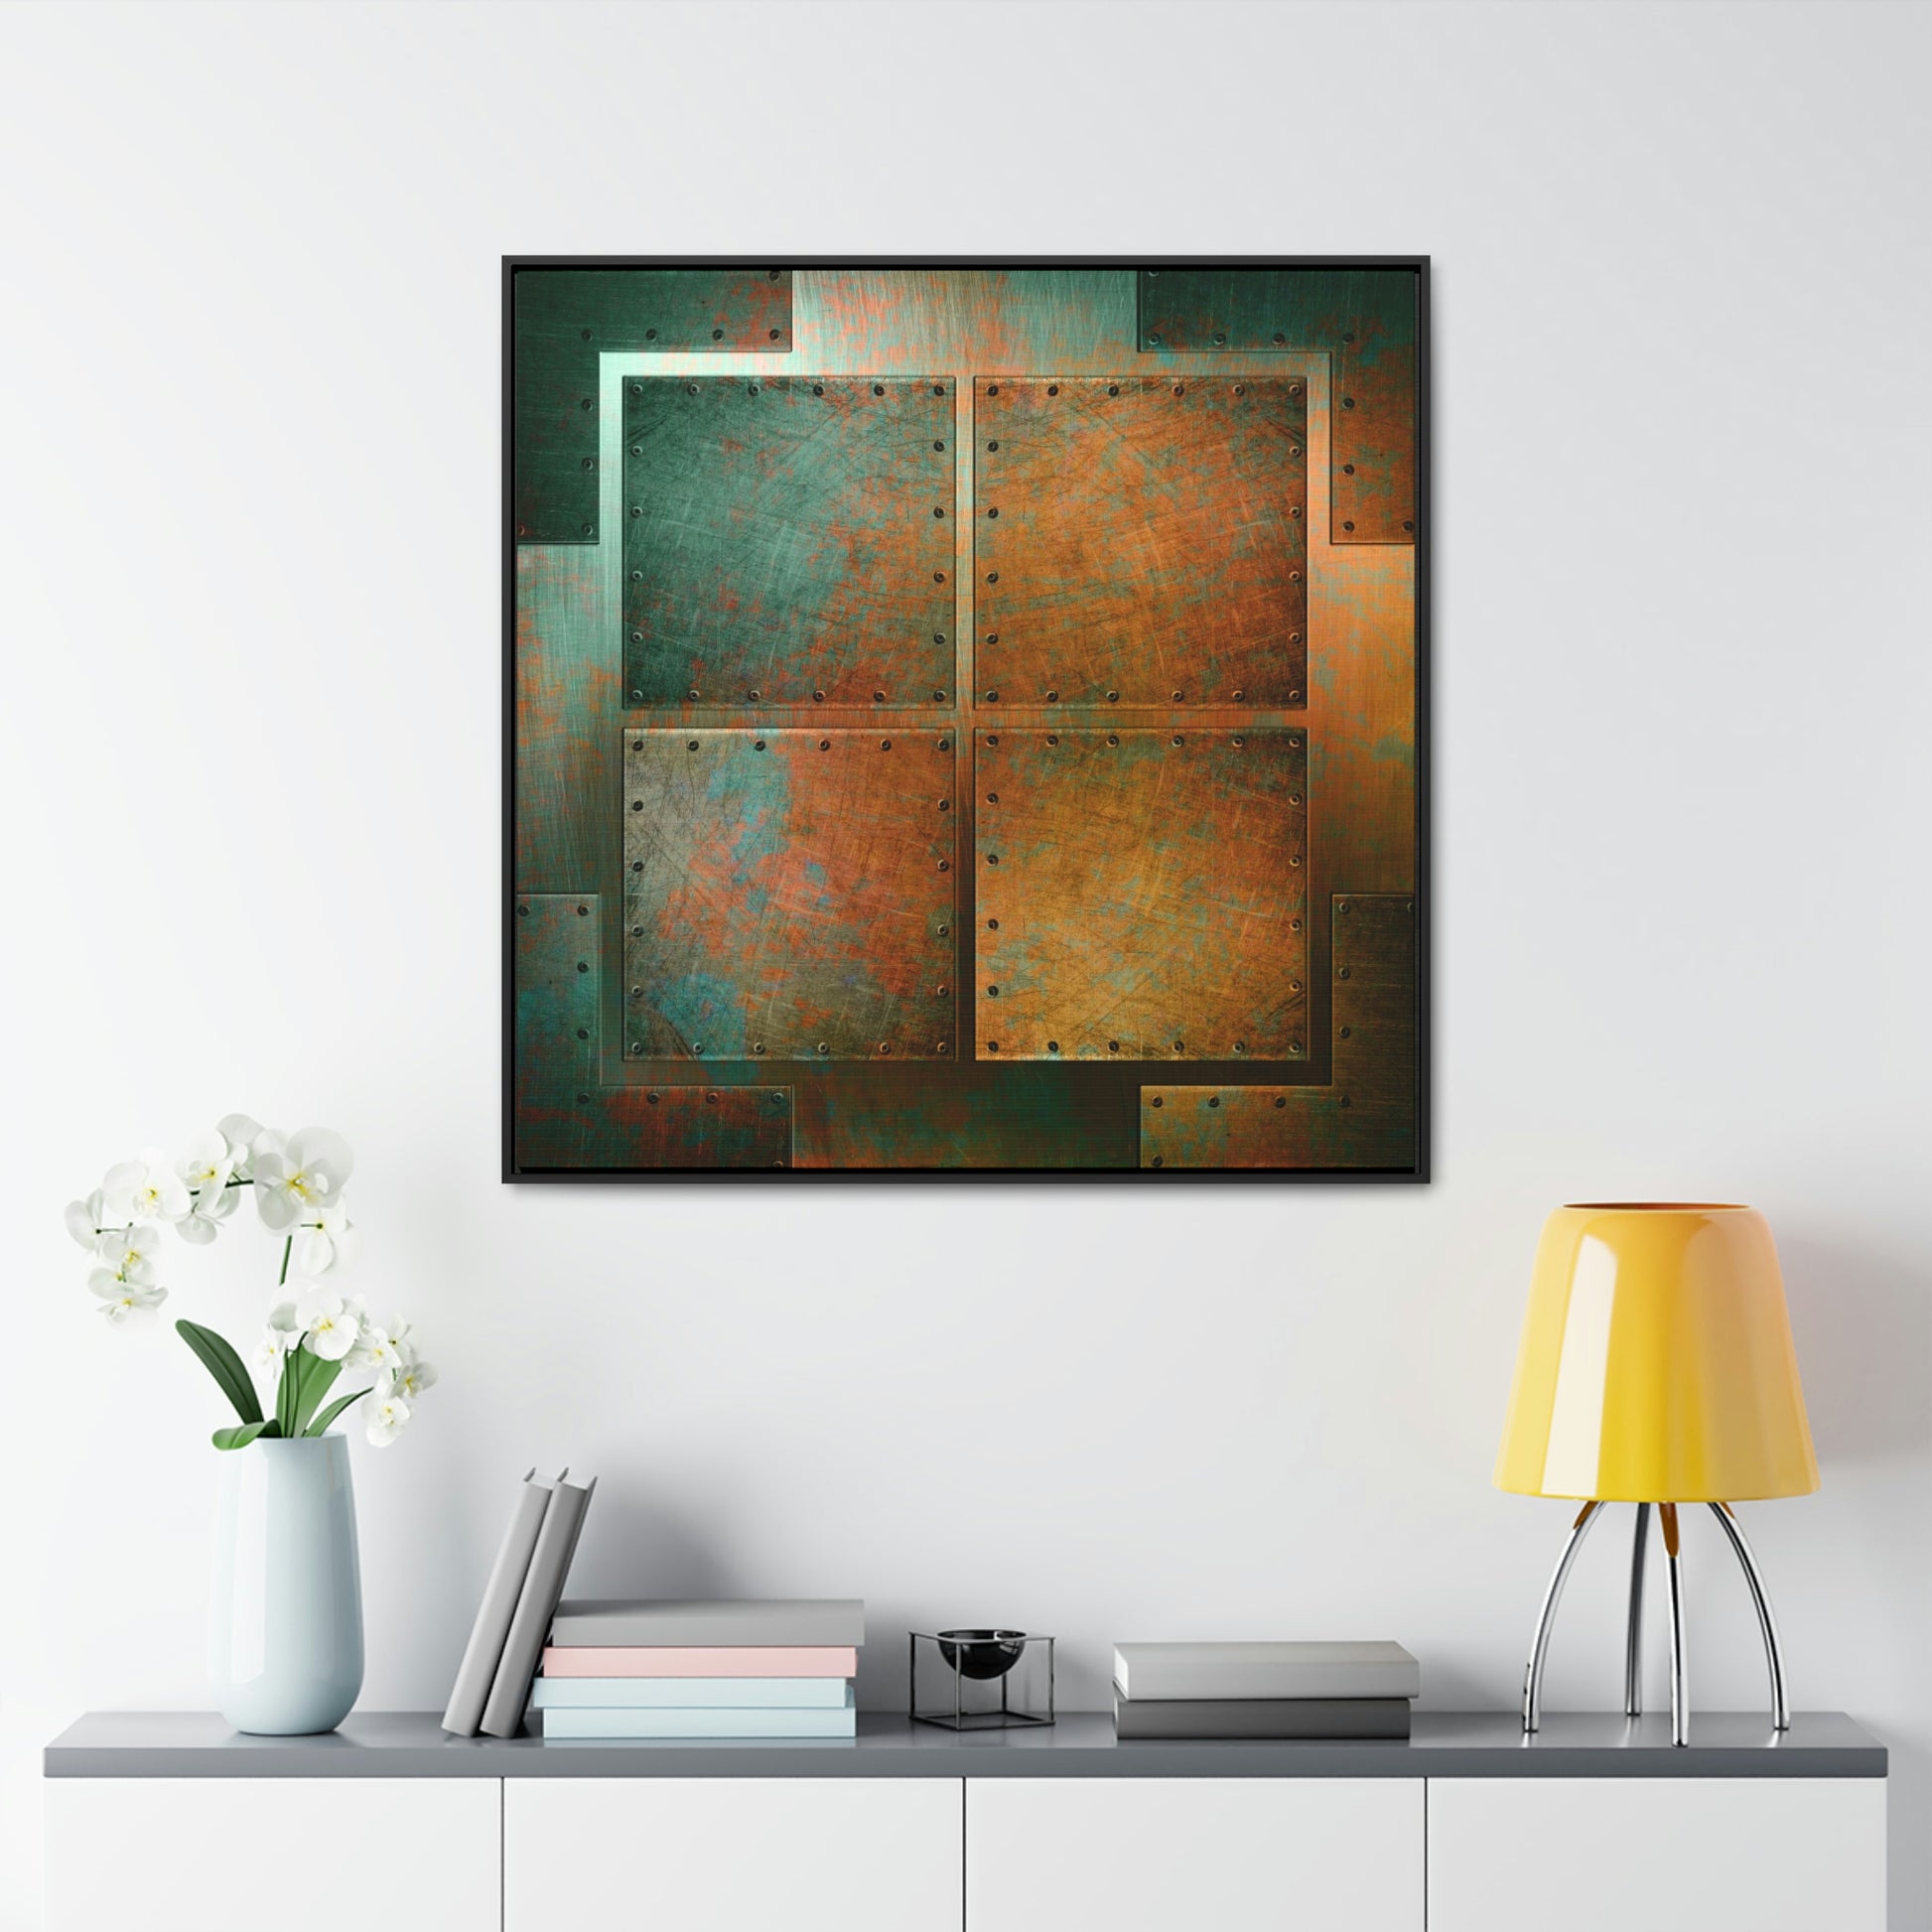 Steampunk Themed Wall Decor - Patinated, Riveted Copper Sheets Print on Canvas in a Floating Frame hung on white wall